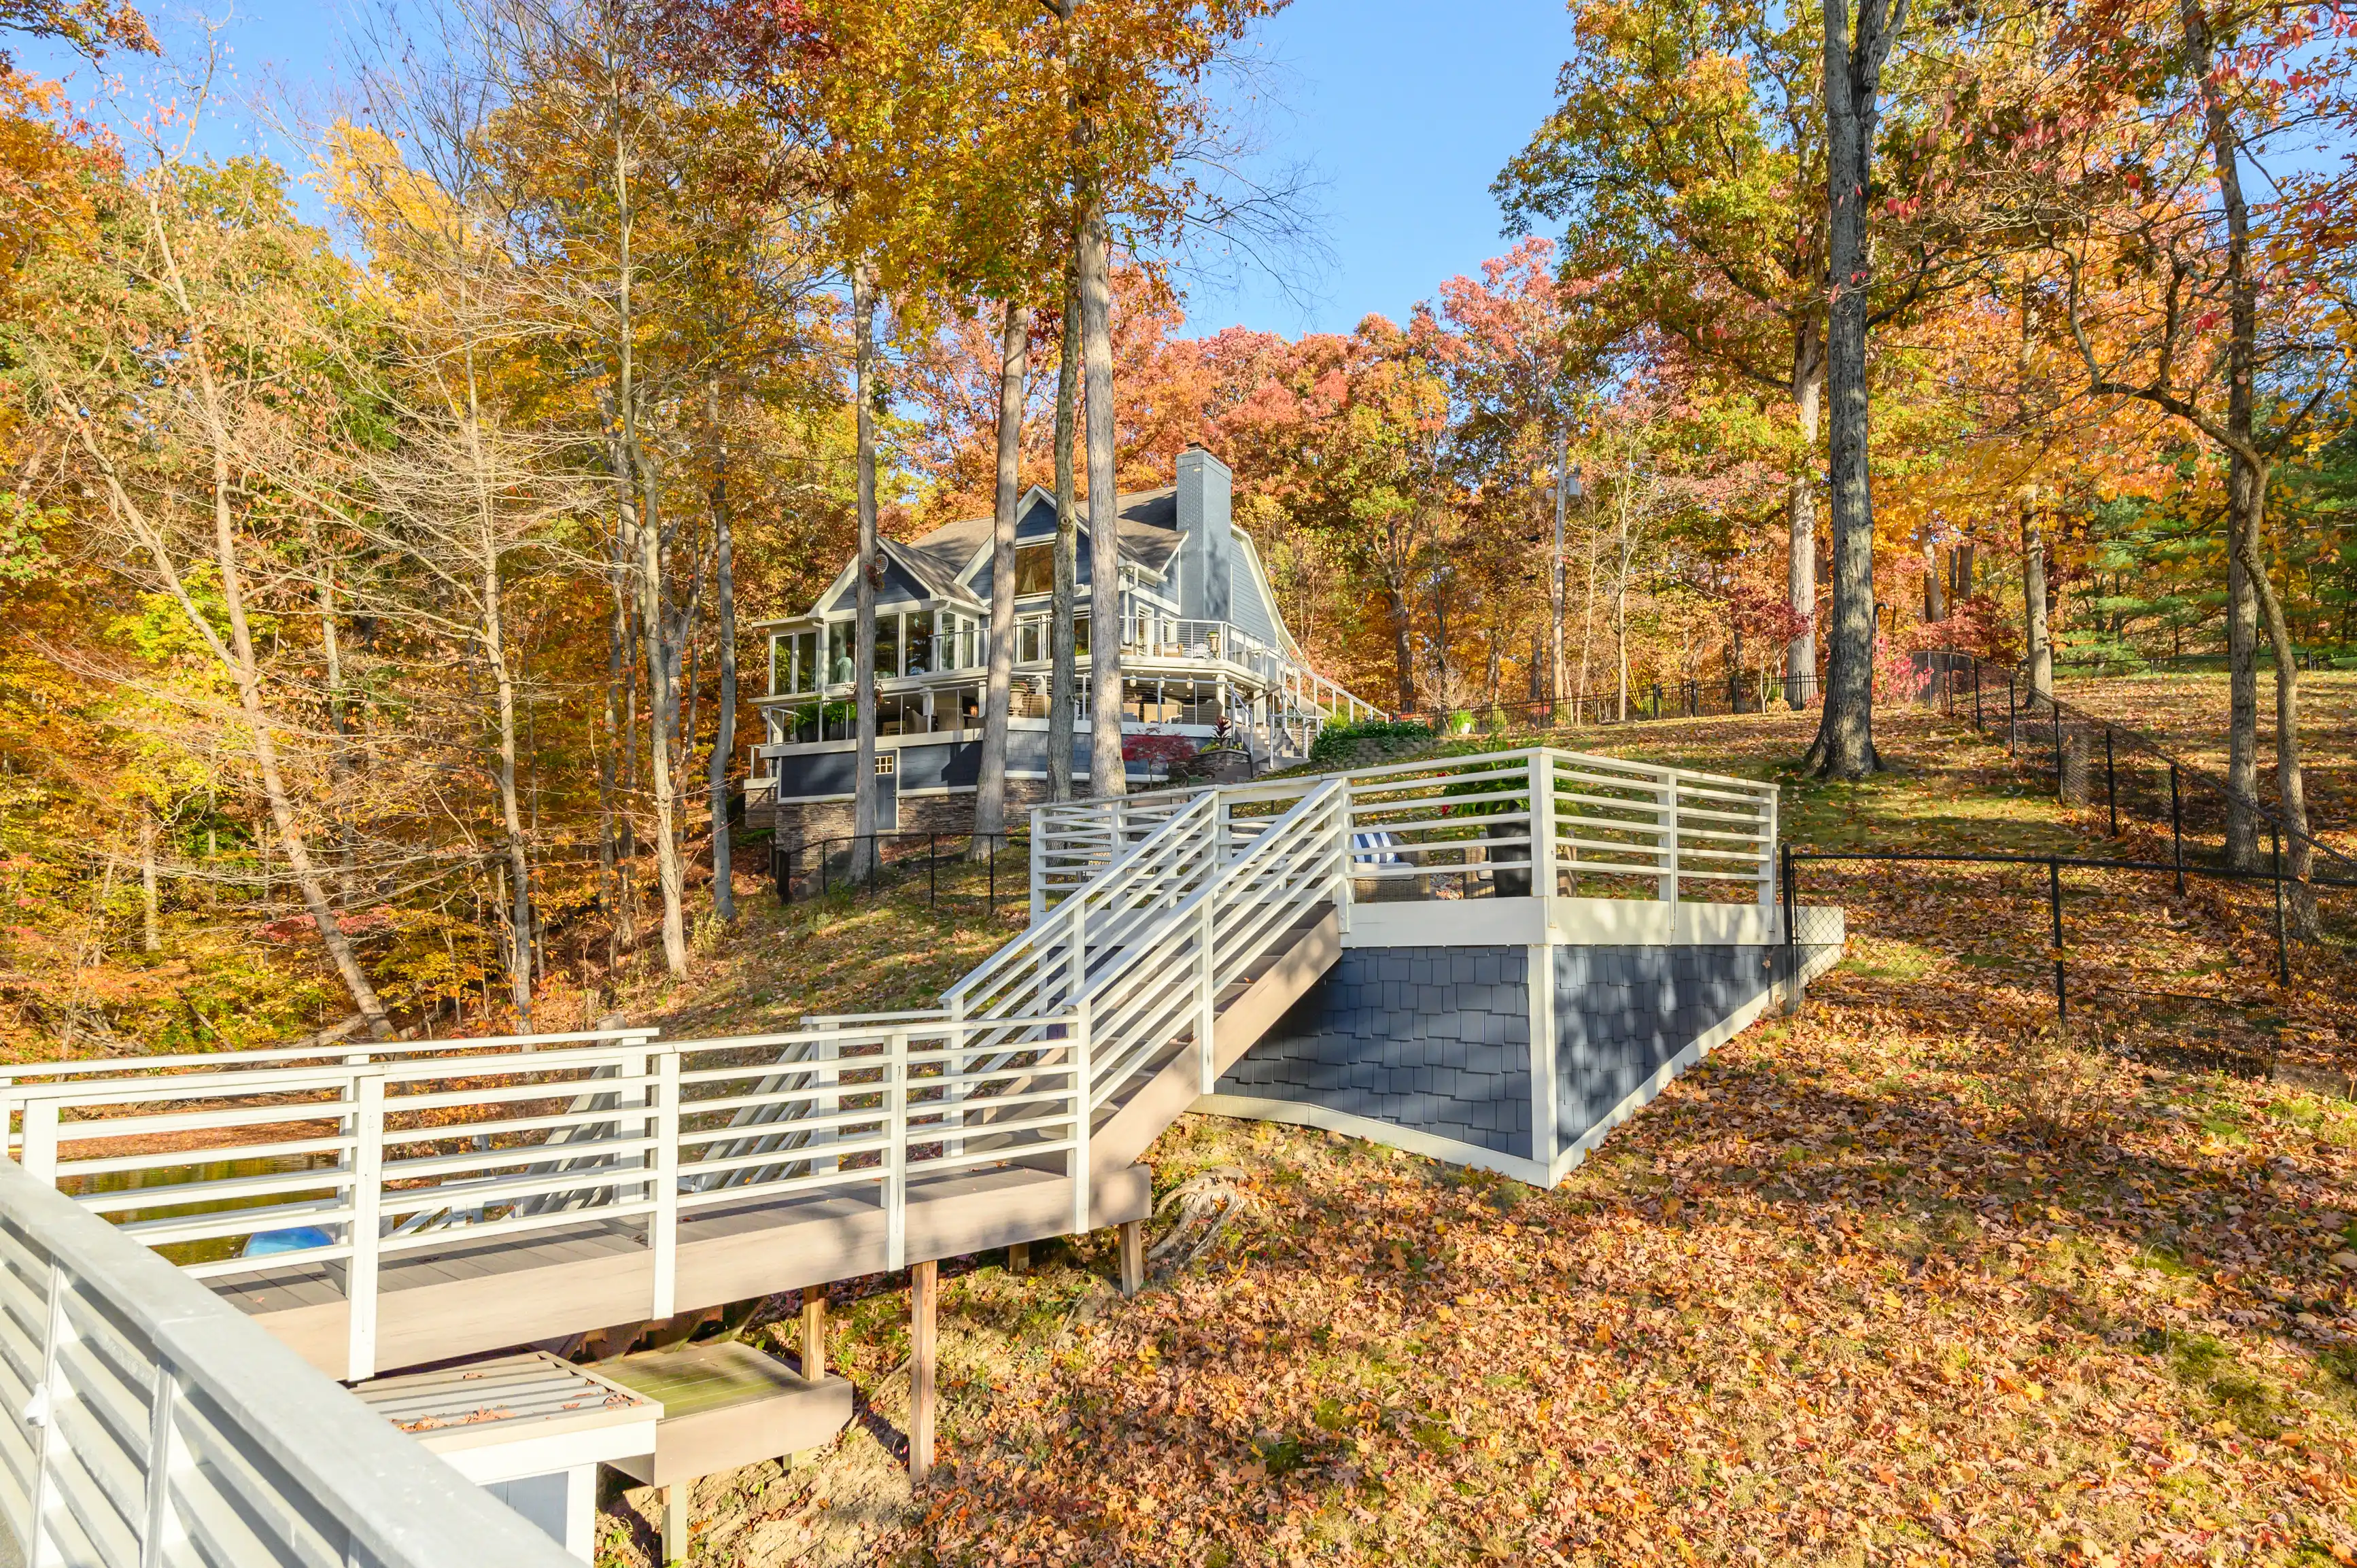 A wooden ramp leading to a large house surrounded by autumn trees with colorful foliage.